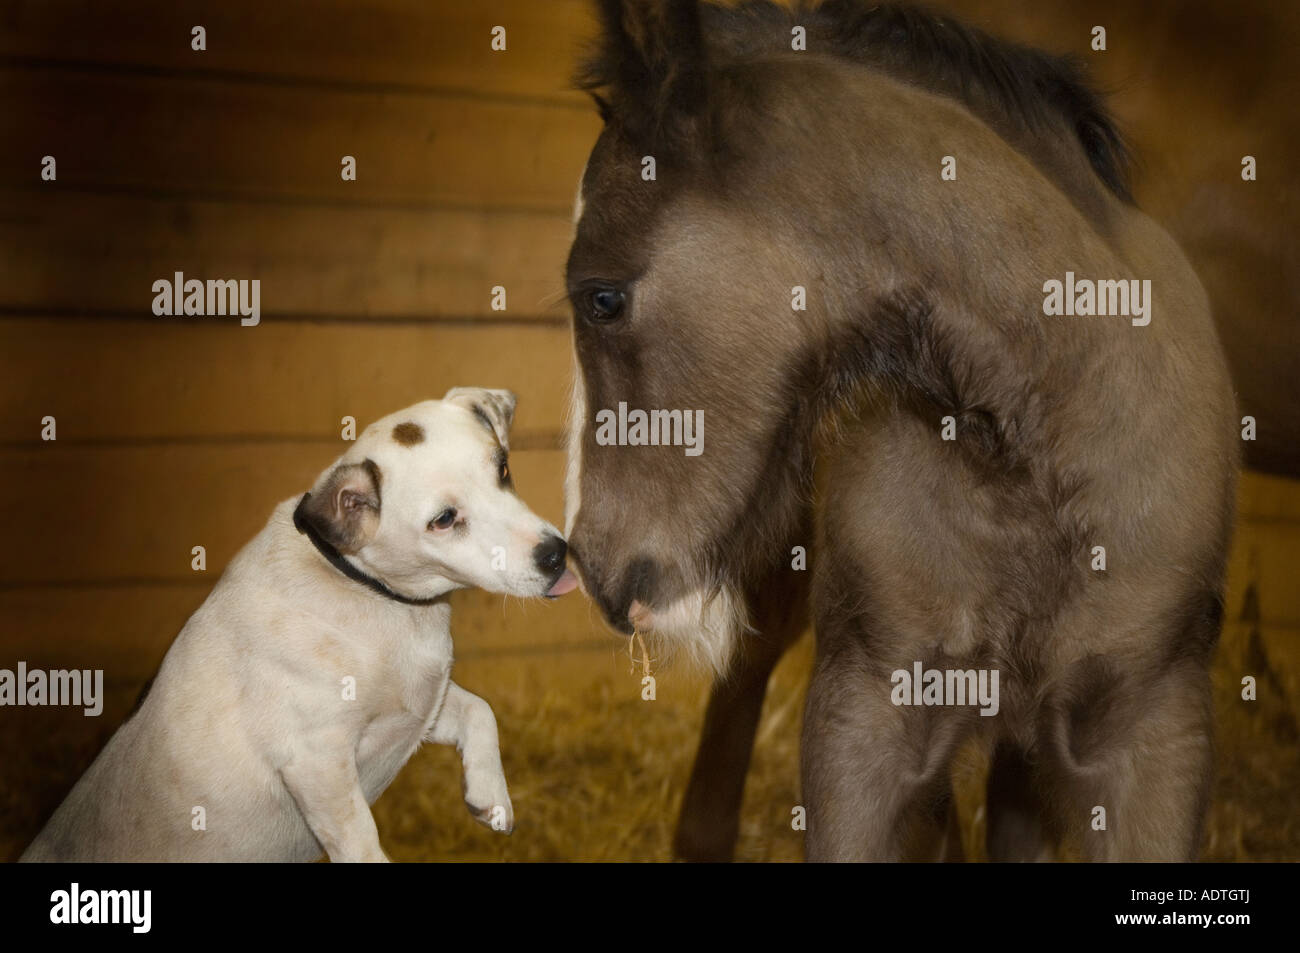 Jack Russel Terrier dog grooms Gypsy Vanner horse foal in stall Stock Photo